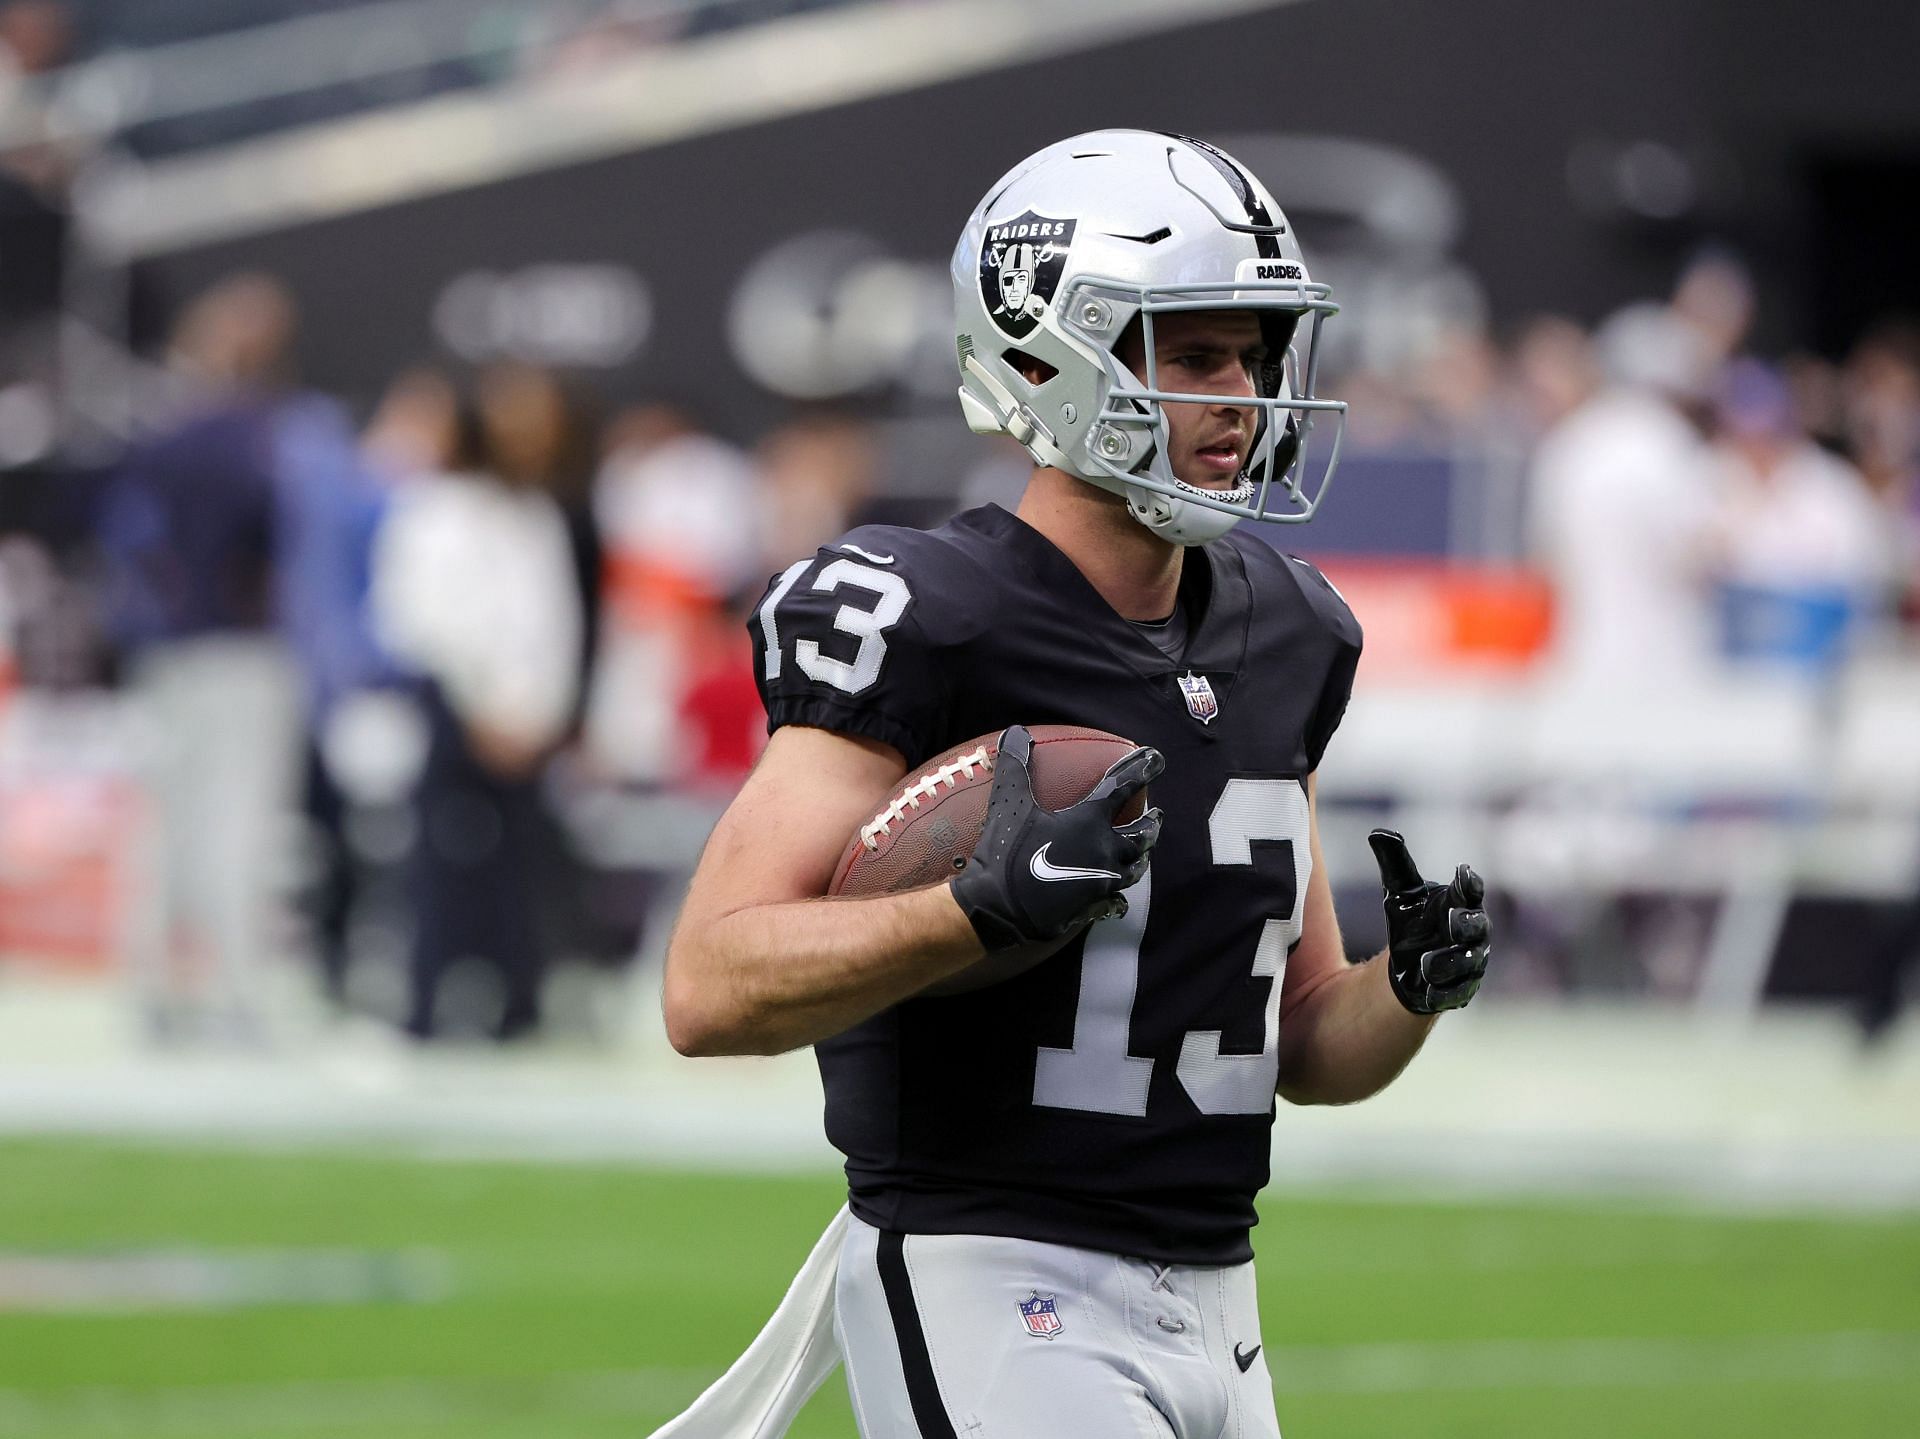 Hunter Renfrow has NFL second-best WR catch rate in past 30 years